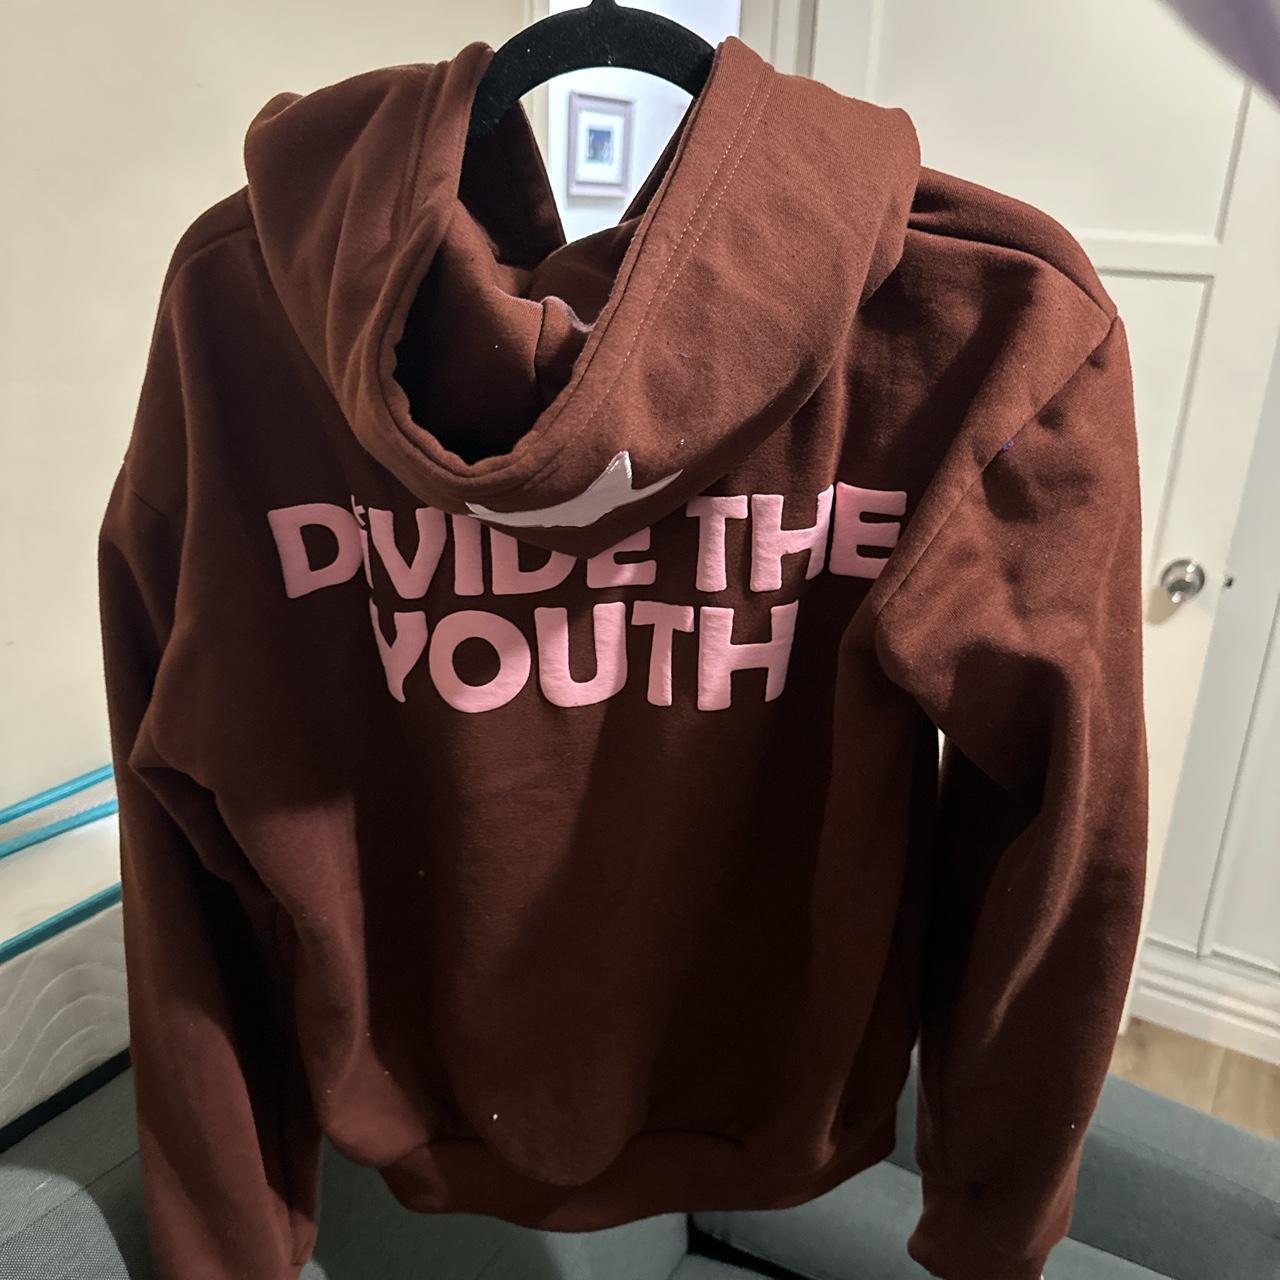 Product Image 3 - Divide the youth hoodie
Dty

Item is